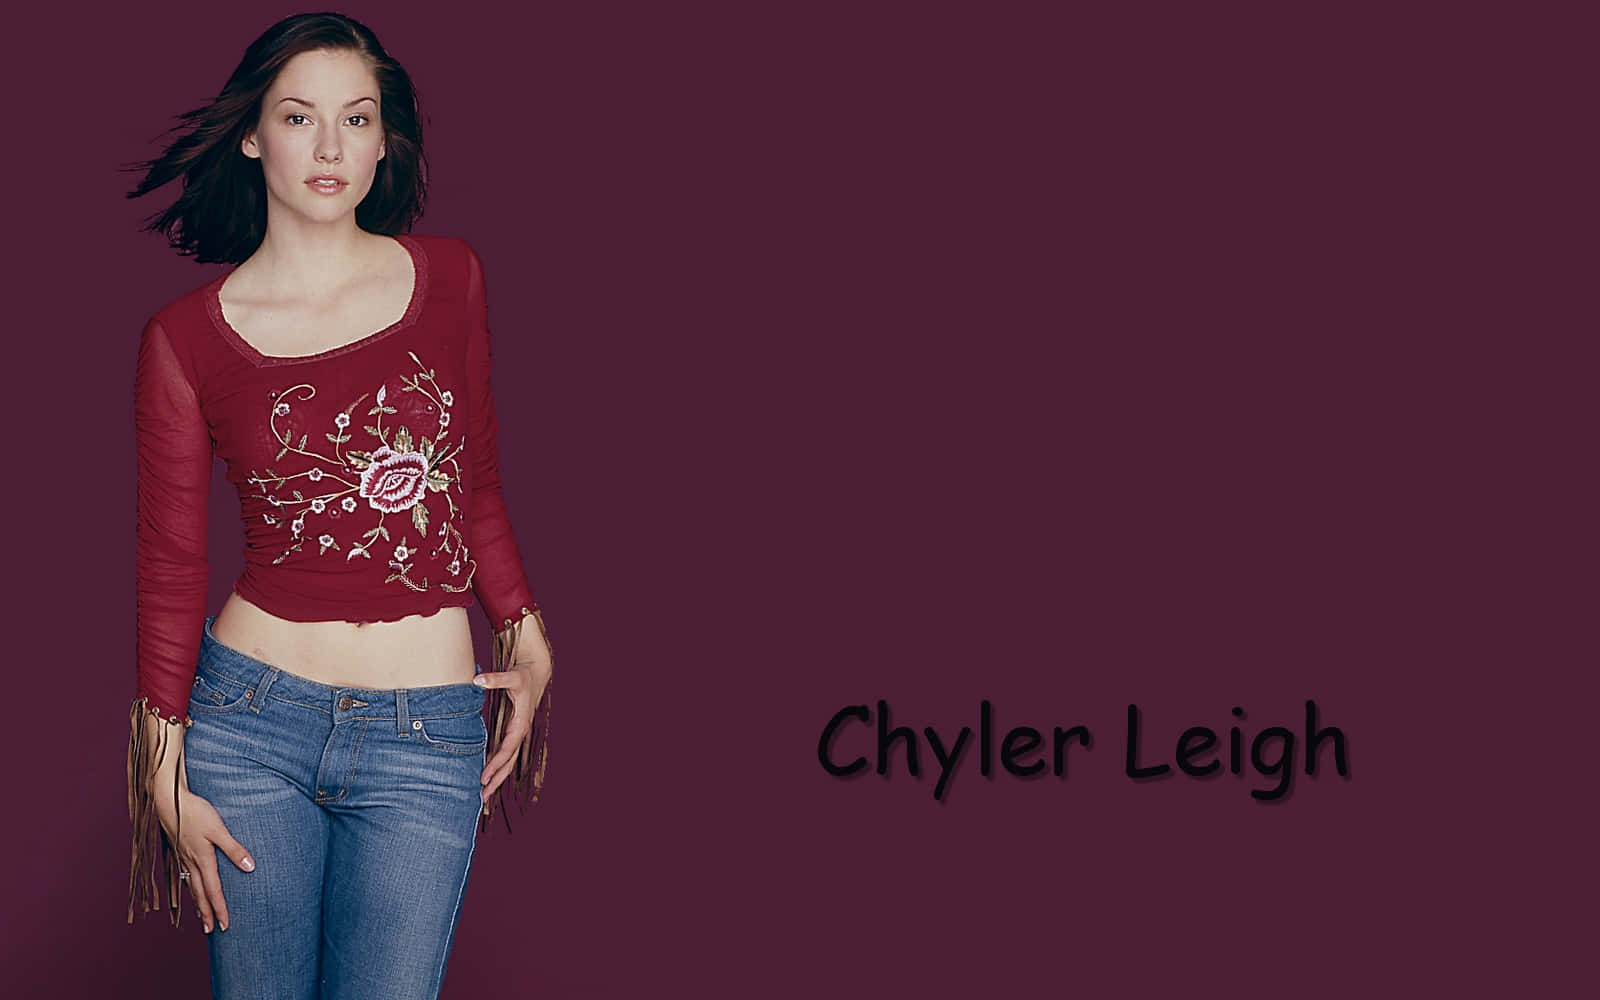 Chyler Leigh Smiling during a Photoshoot Wallpaper